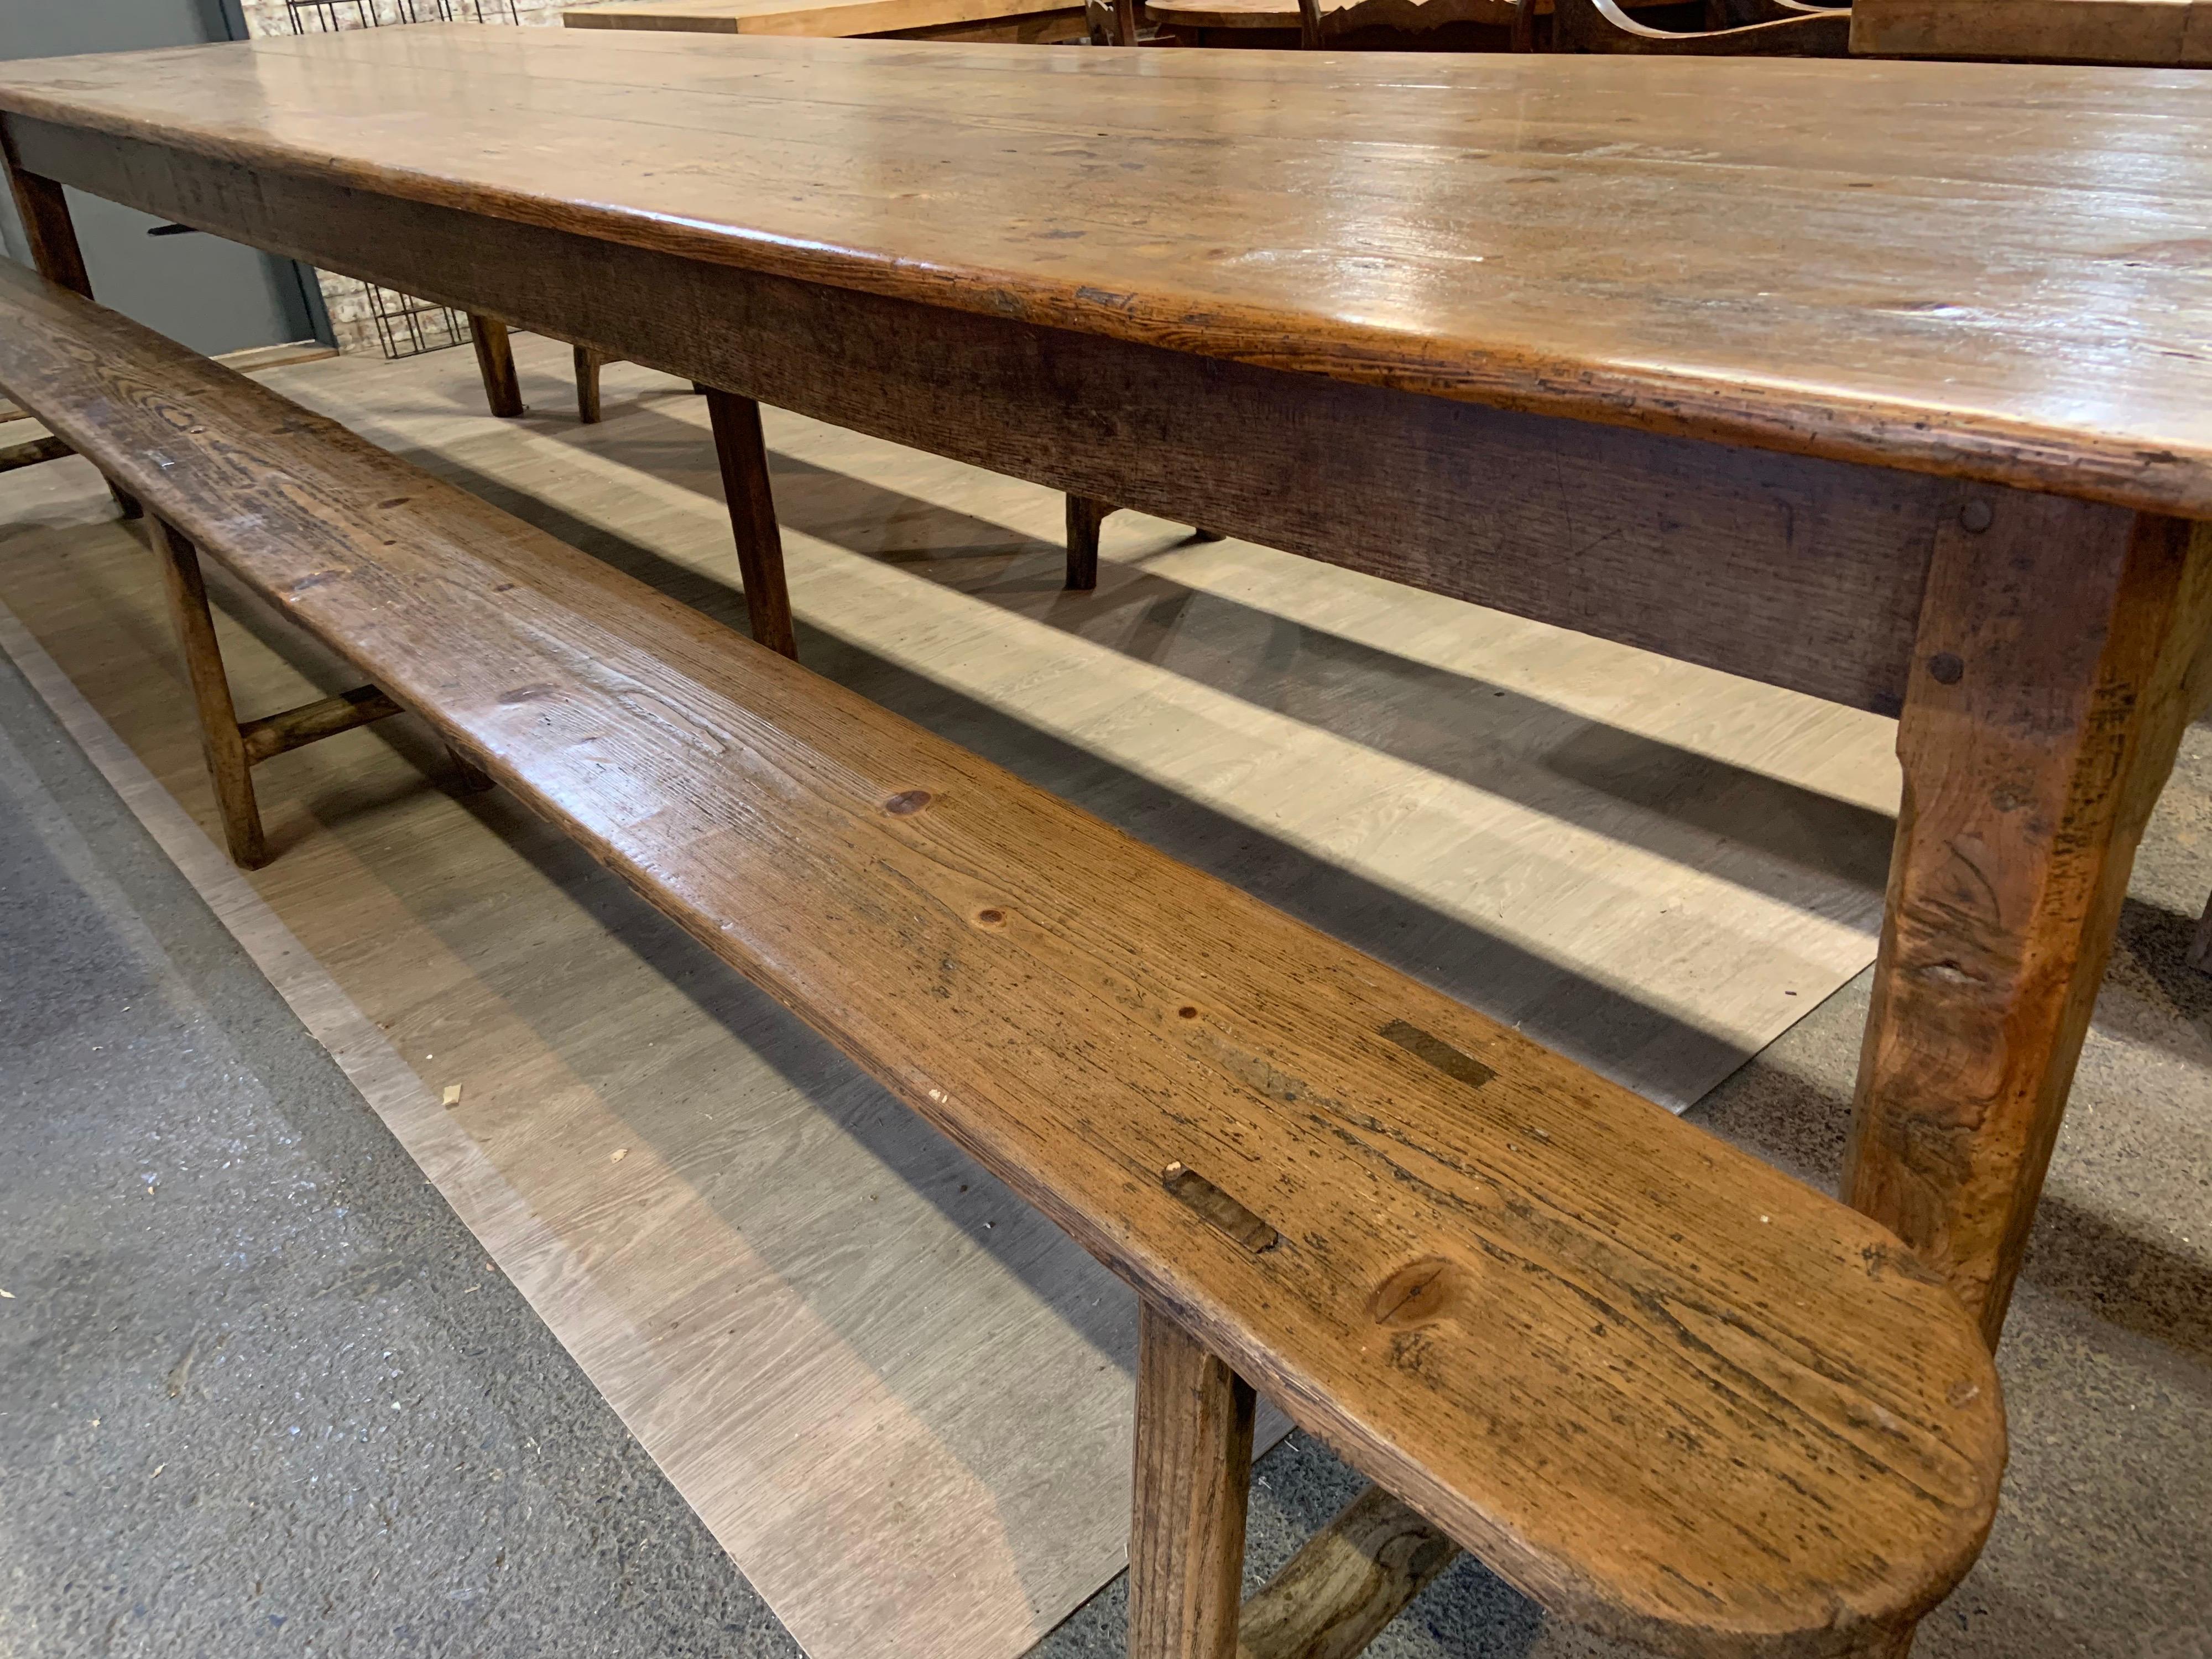 19th century large farmhouse table with two long, wide benches. The table has great width and length. The table sits on six square tapering legs. The table has a wonderful four plank top with glorious colour and patination. The table has good